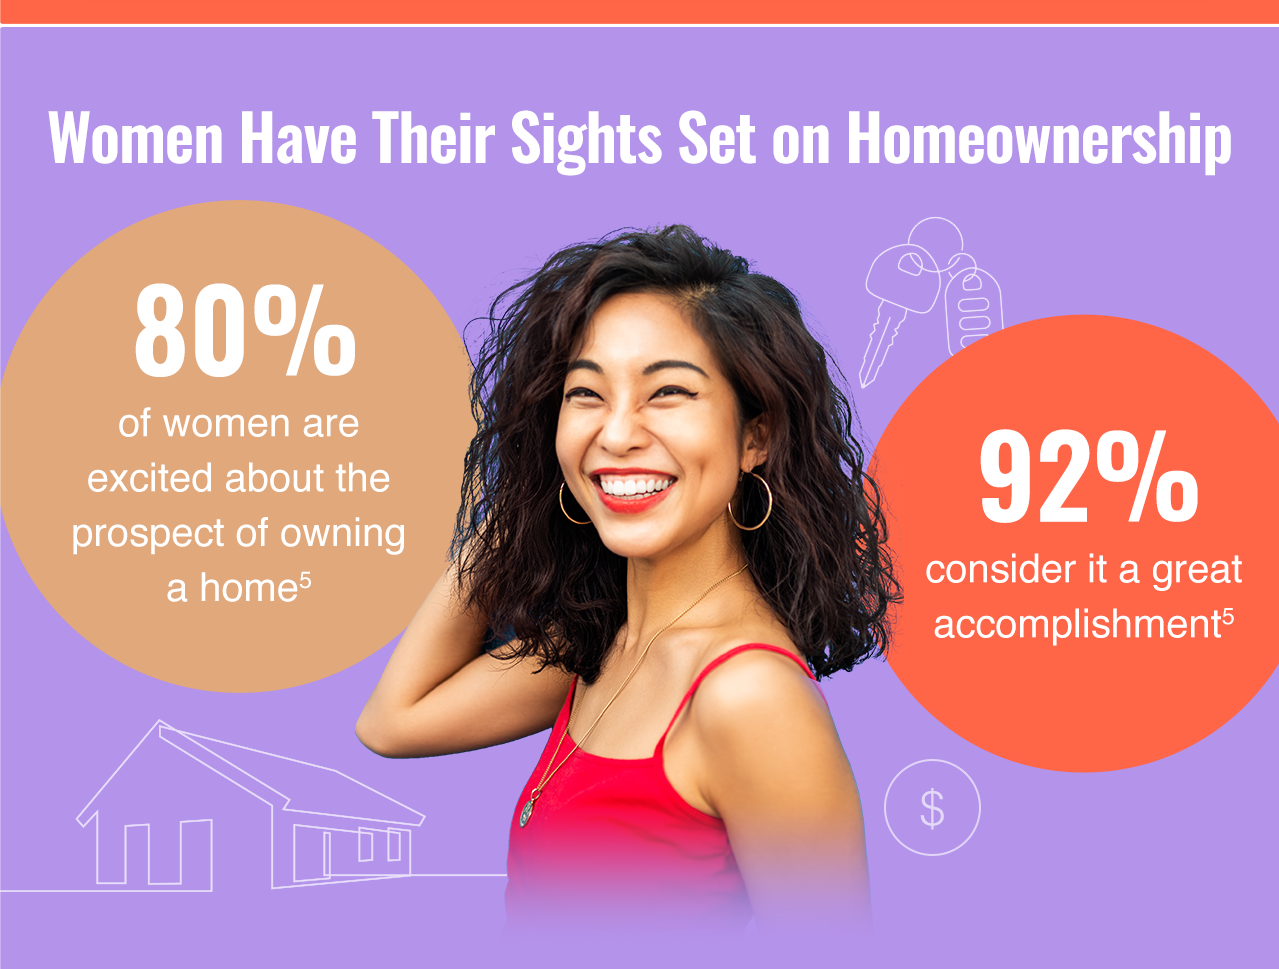 Women Have Their Sights Set on Homeownership: 80% of women are excited about the prospect of owning a home[5]